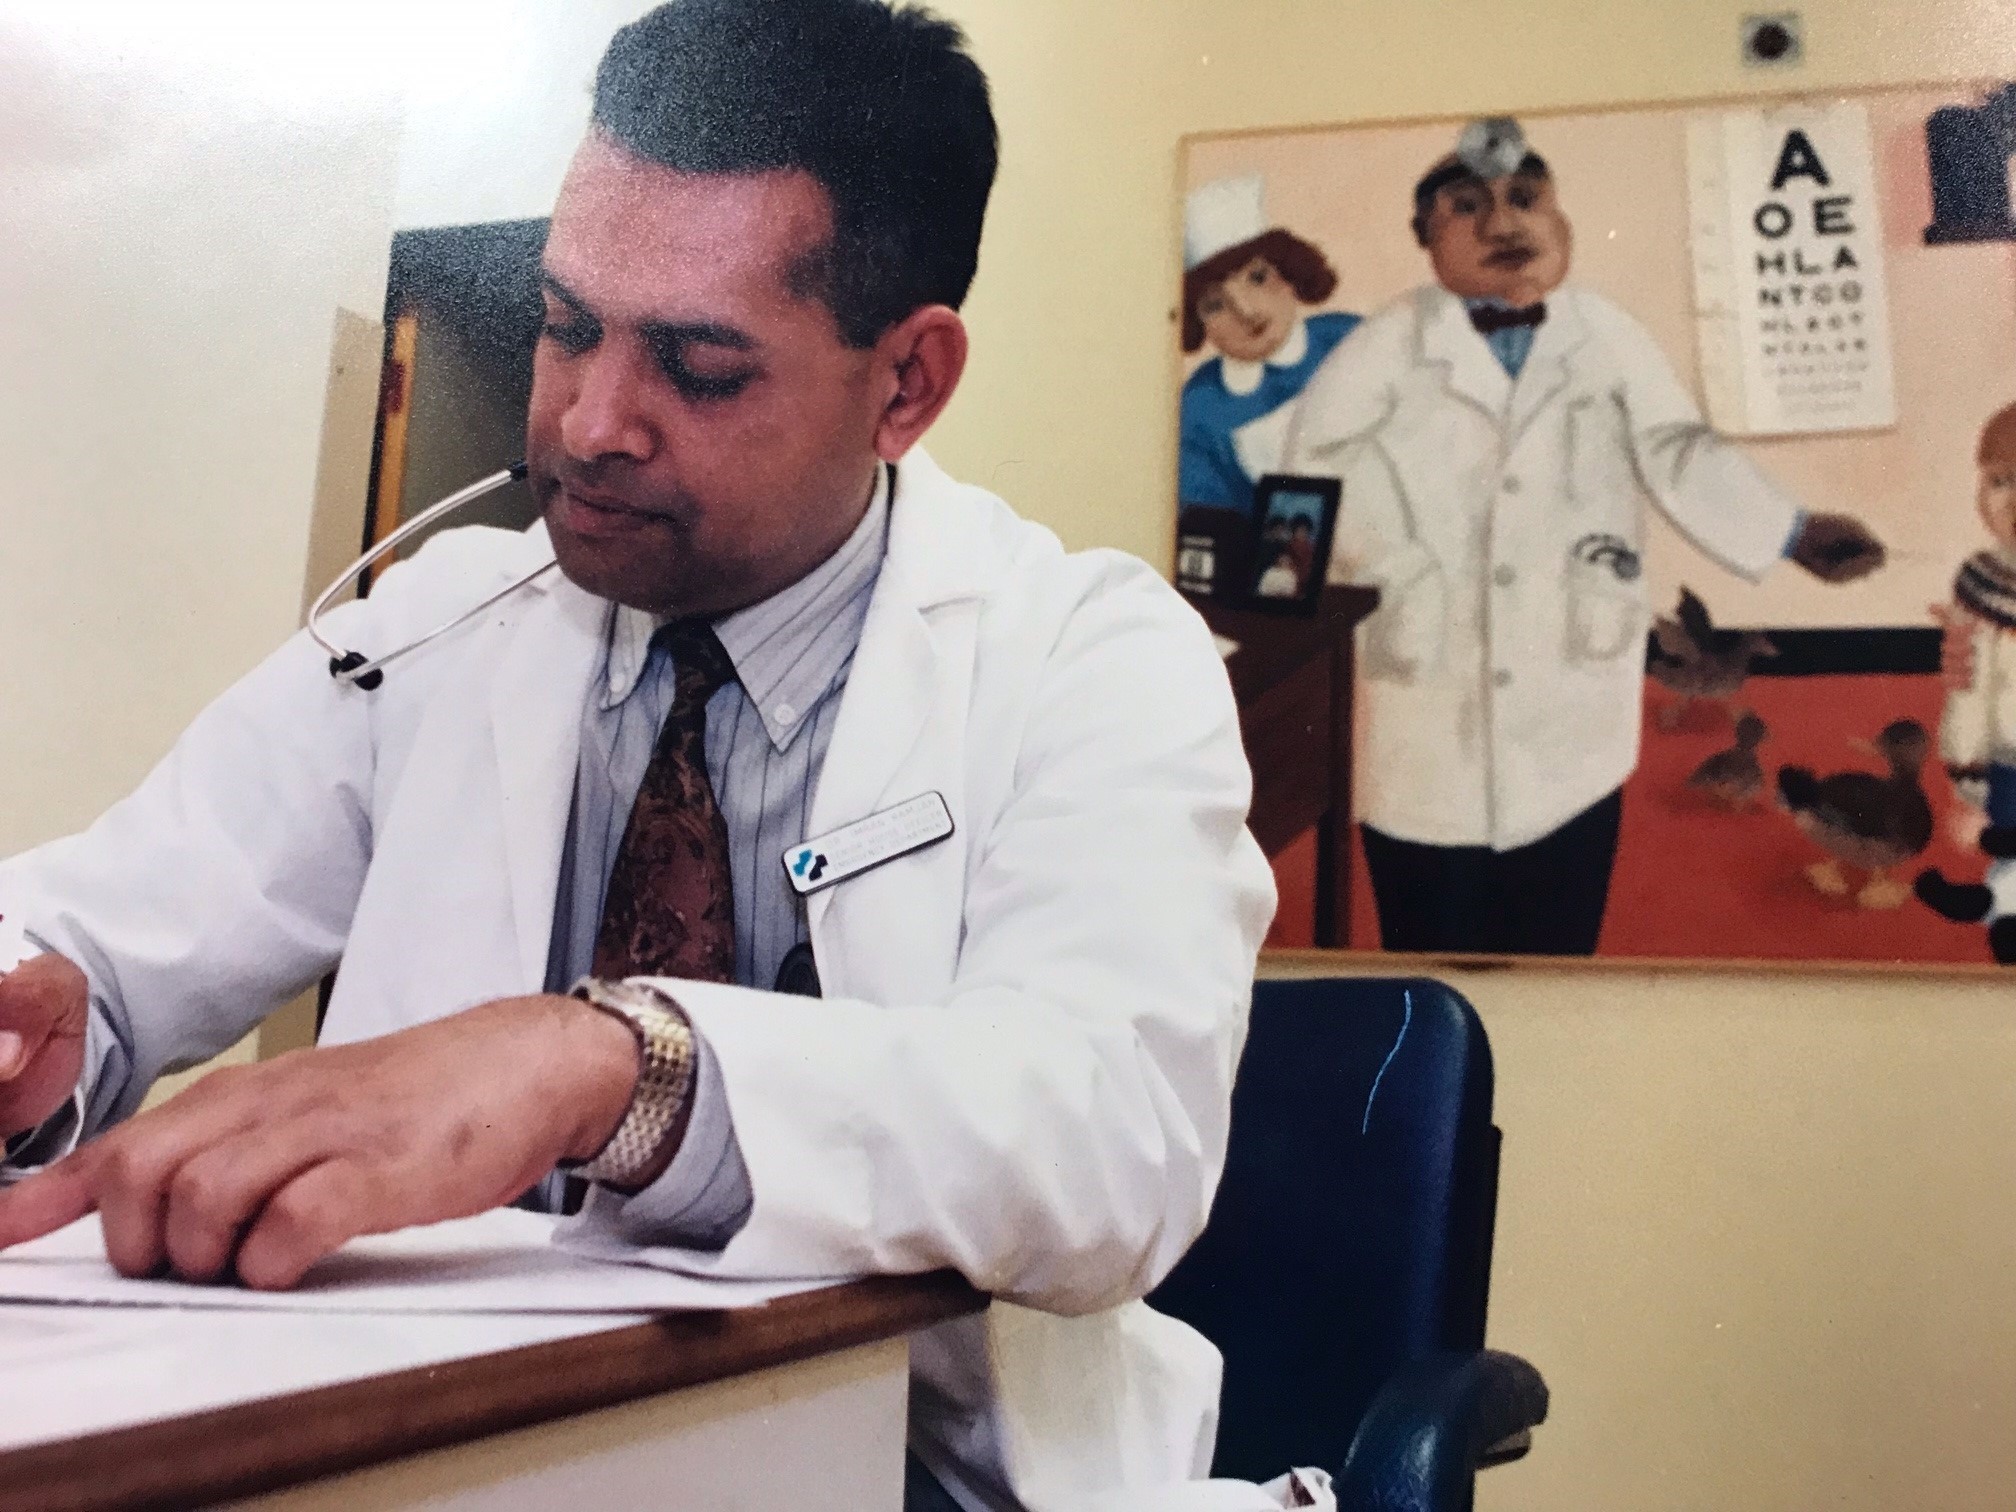 Notes - doctor Imran Ramjan writing up patient notes in 1995